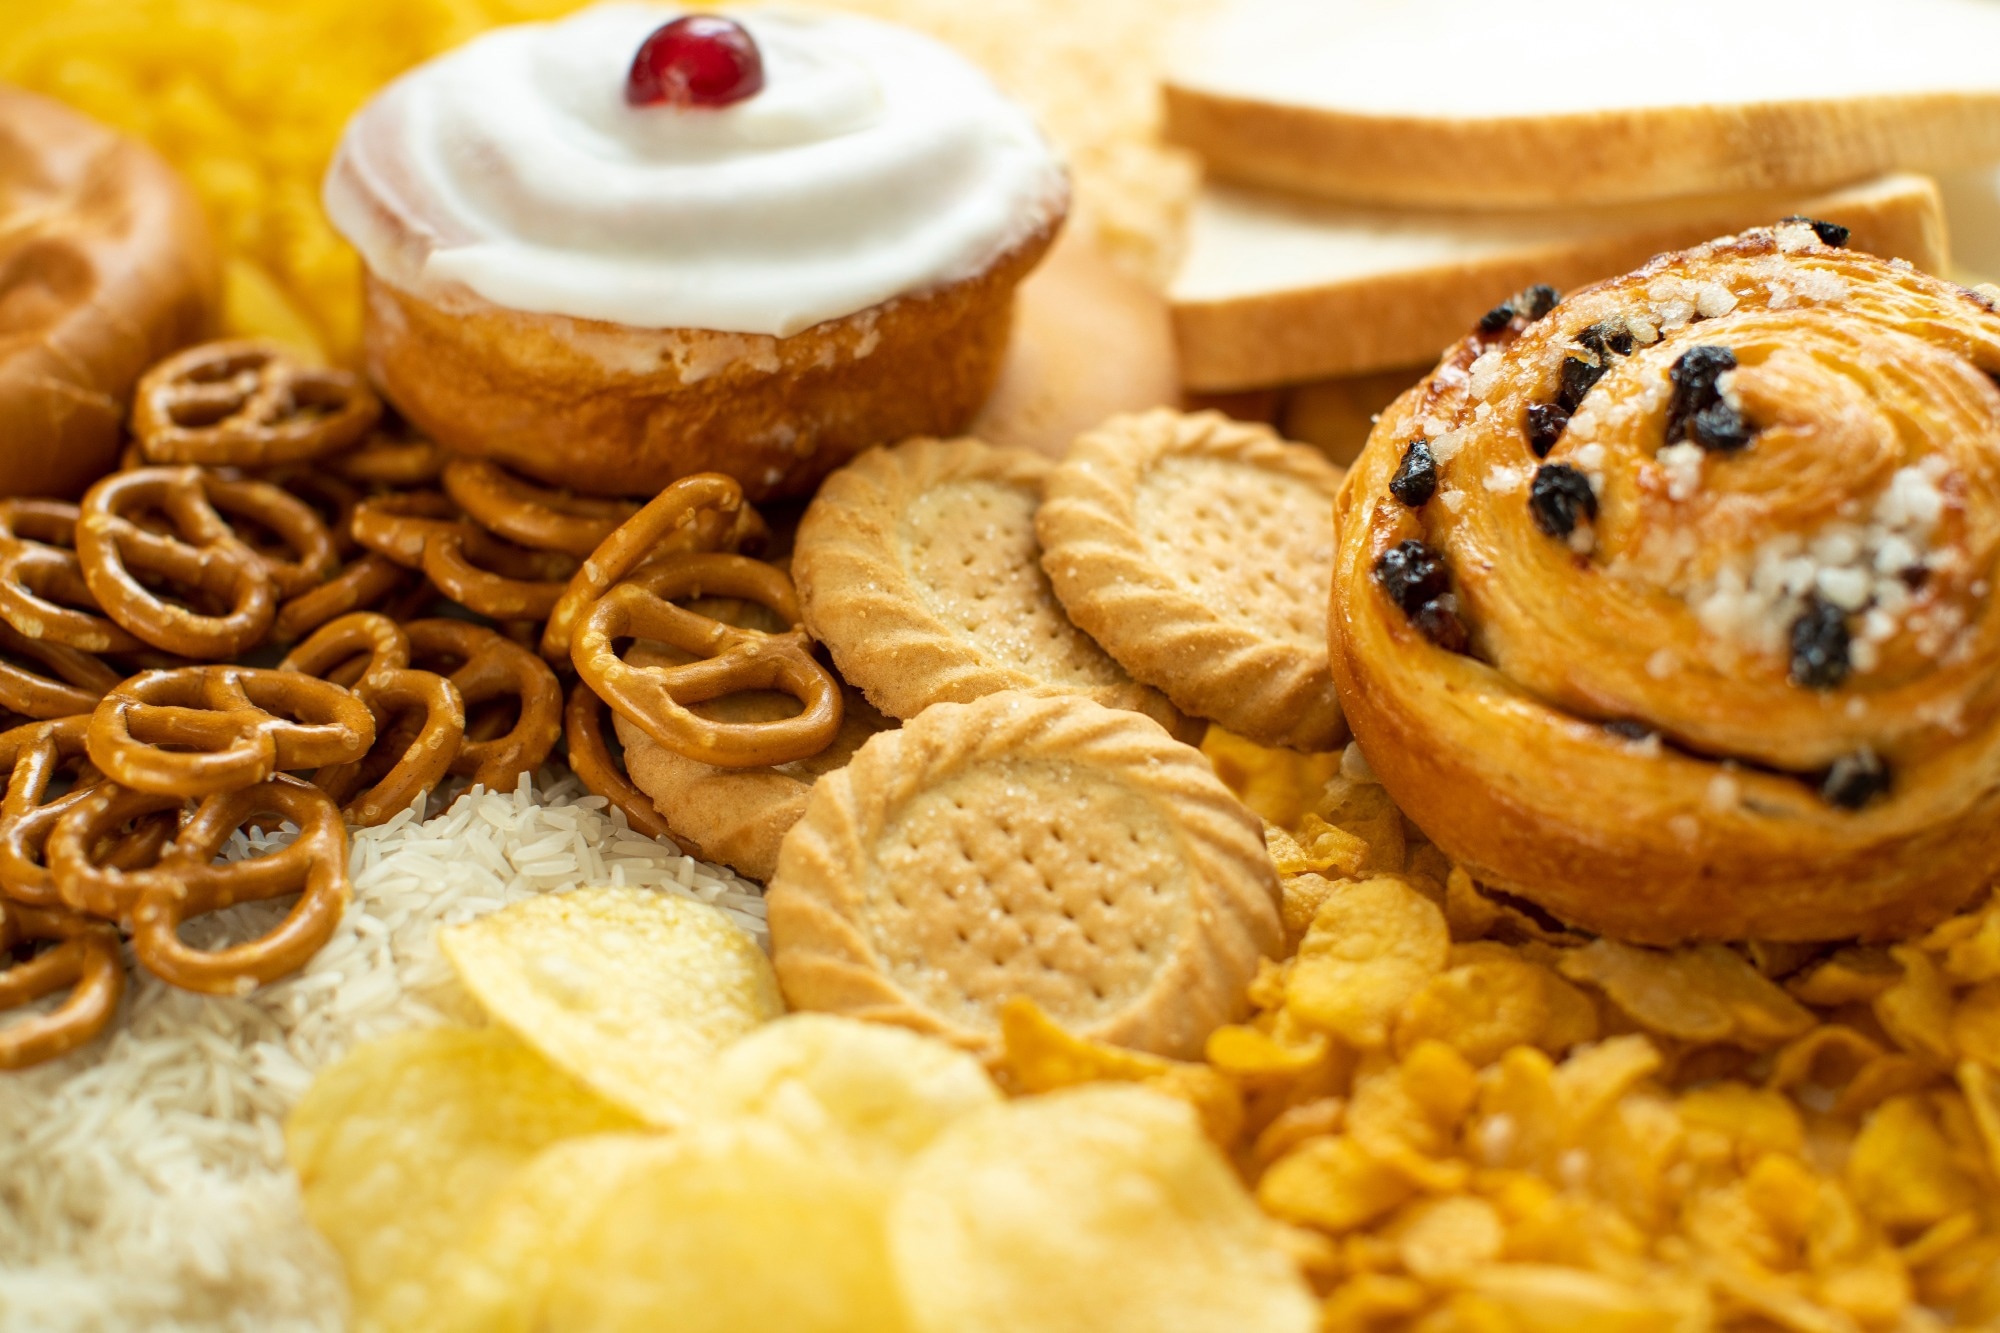 Long-term consumption of ultra-processed foods may increase depression risk